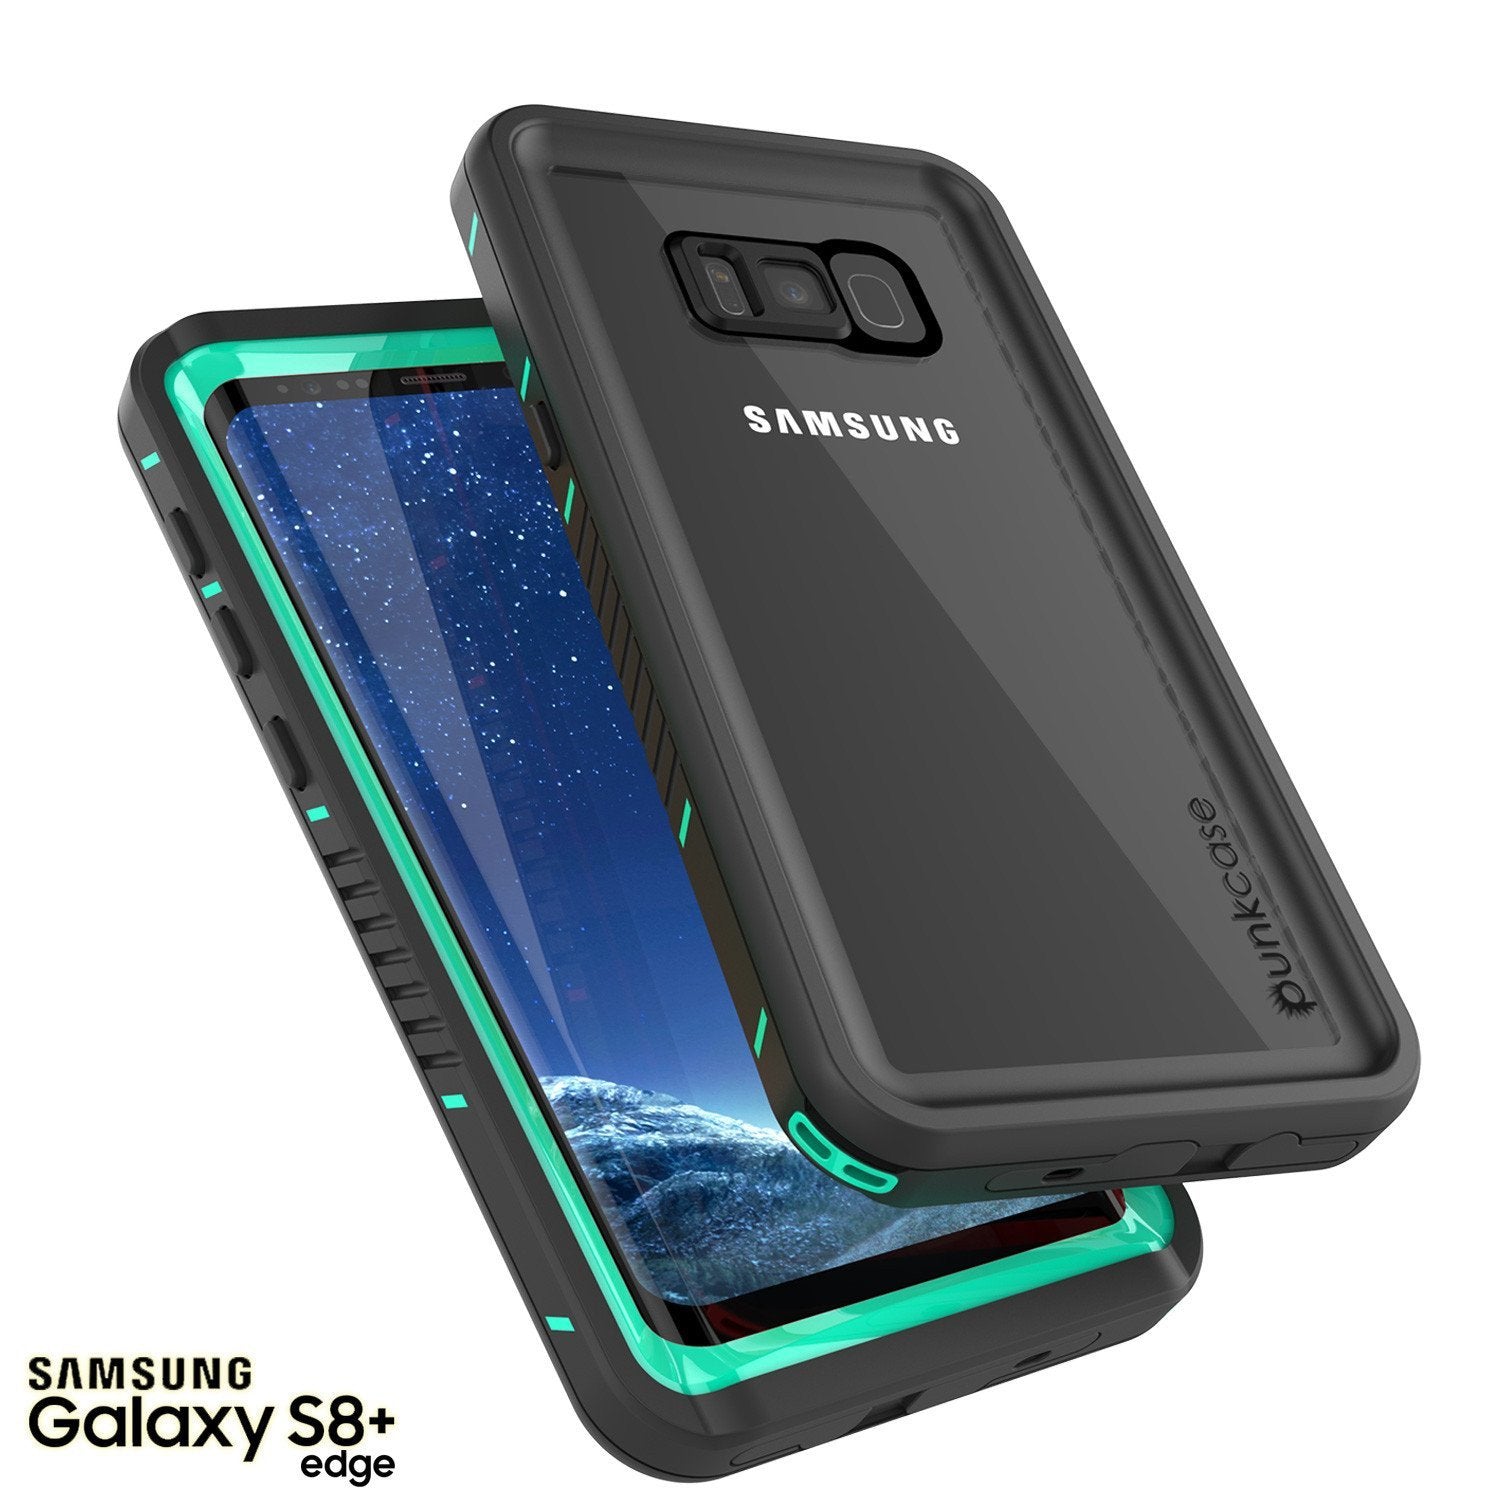 Galaxy S8 PLUS Waterproof Case, Punkcase [Extreme Series] [Slim Fit] [IP68 Certified] [Shockproof] [Snowproof] [Dirproof] Armor Cover W/ Built In Screen Protector for Samsung Galaxy S8+ [Teal] - PunkCase NZ